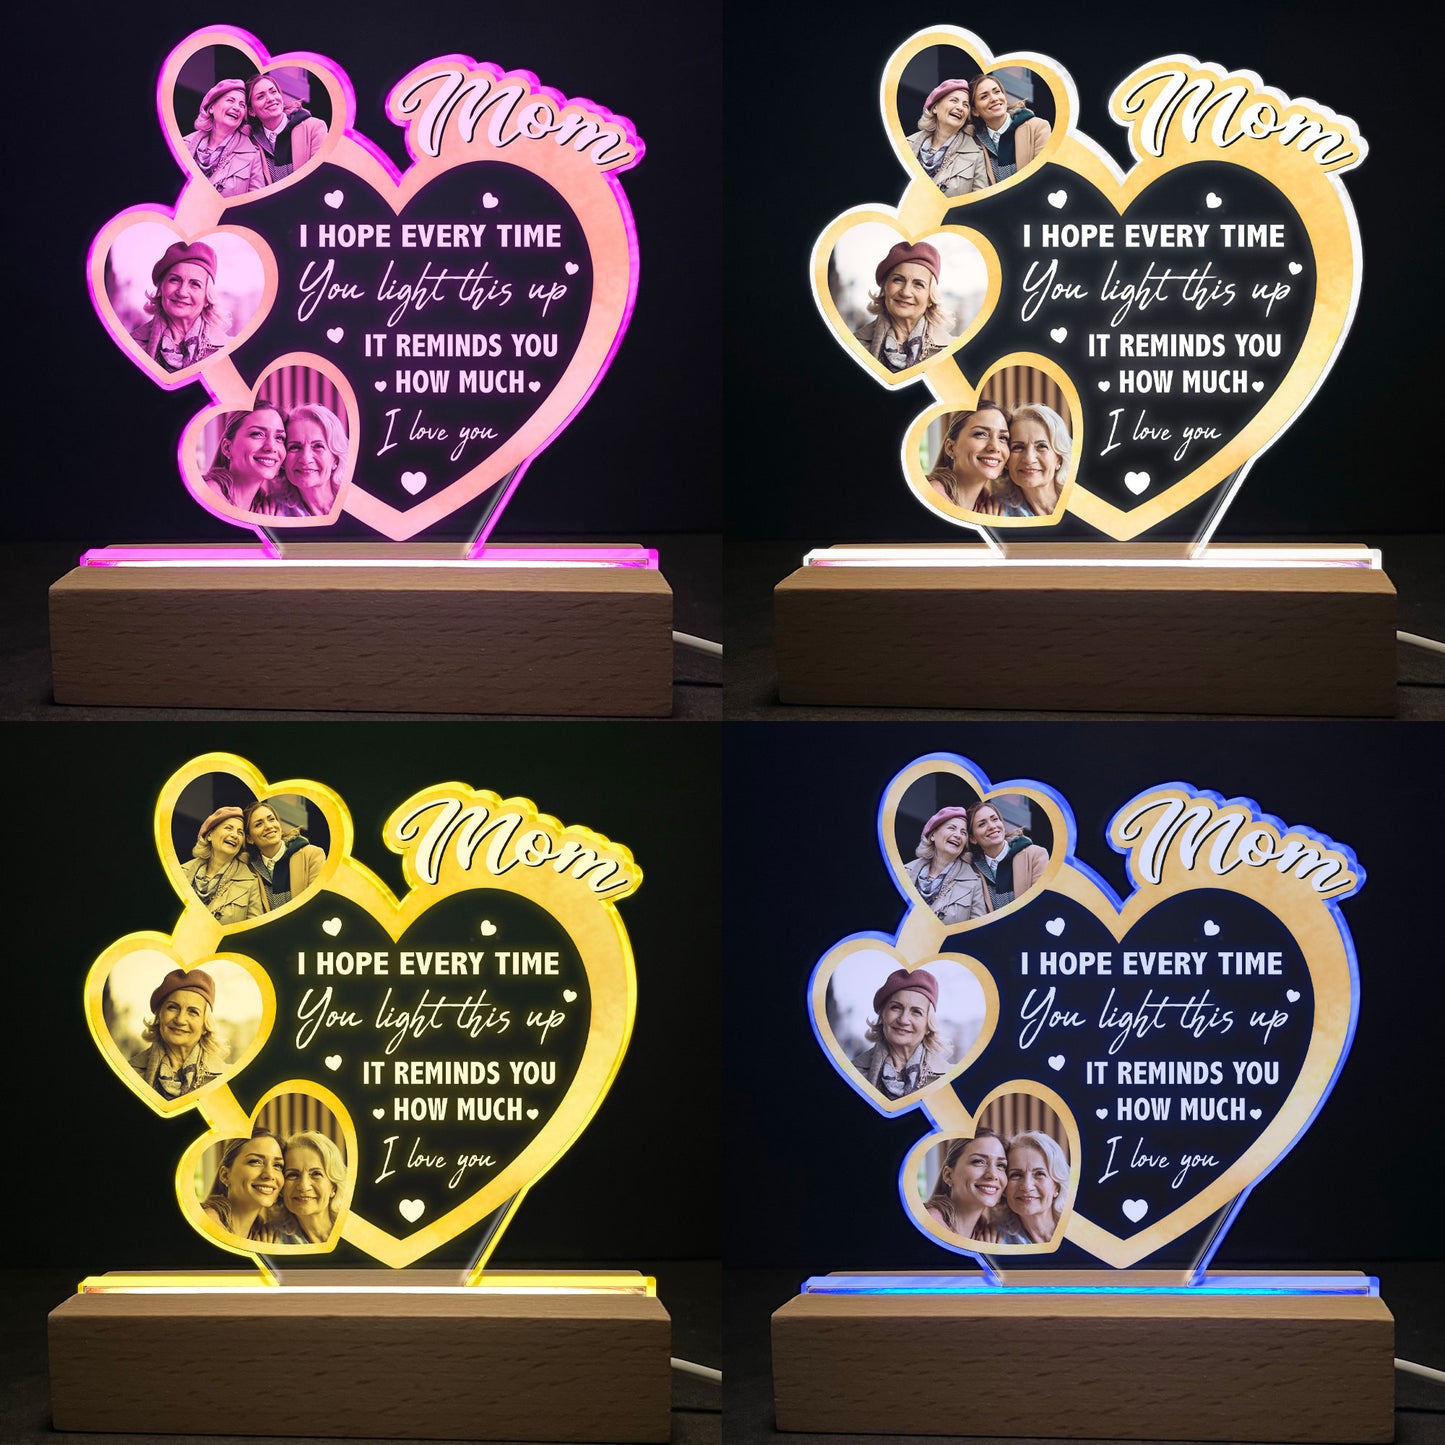 We Hope Every Time You Light This Up - Personalized Photo LED Light